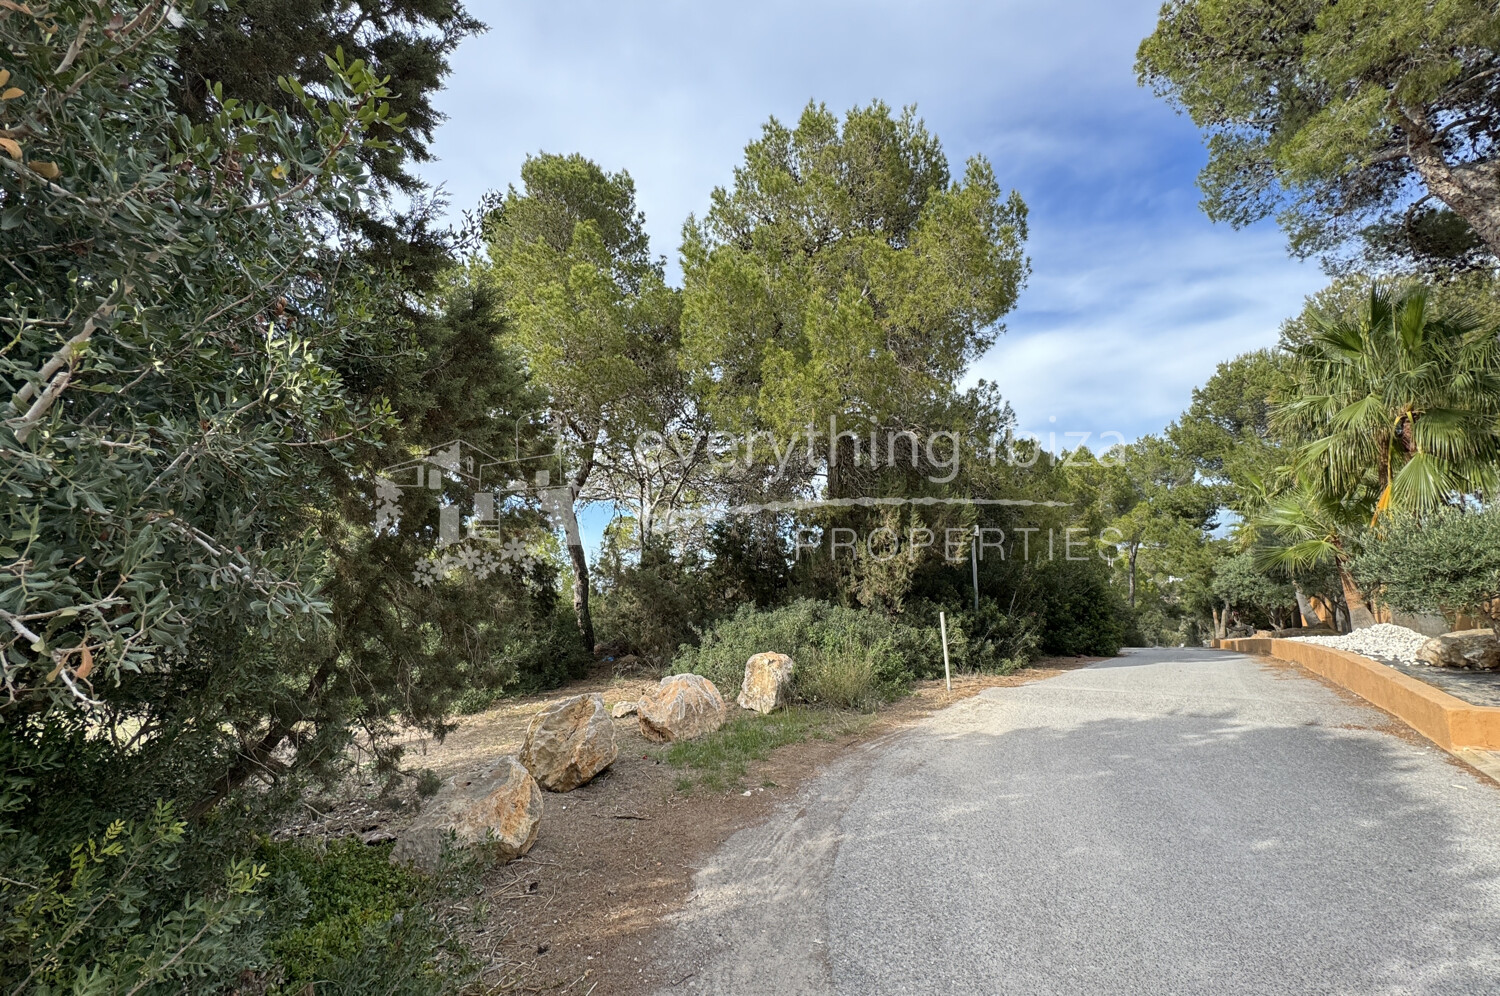 Super Large 70.000m2 Plot of Prime Constructable Land Close to Cala Conta, ref. 1699, for sale in Ibiza by everything ibiza Properties